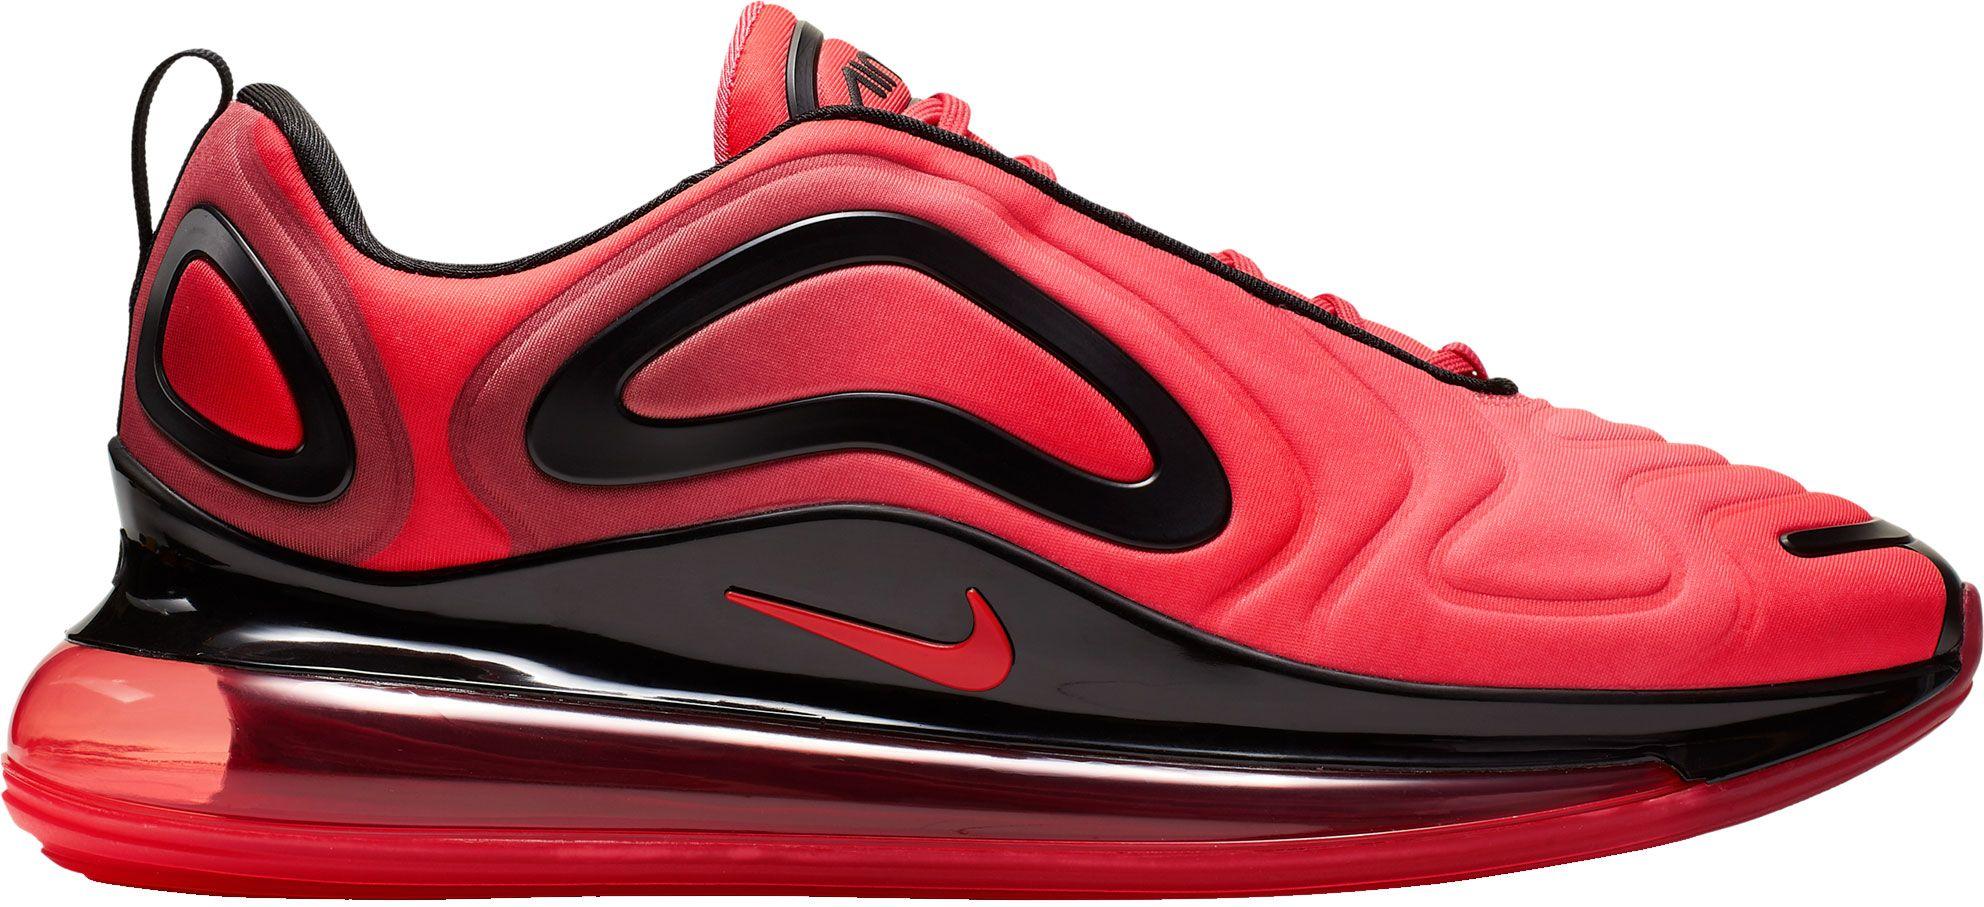 Nike Synthetic Air Max 720 in Bright Crimson/Black (Red) for Men - Save 46%  | Lyst